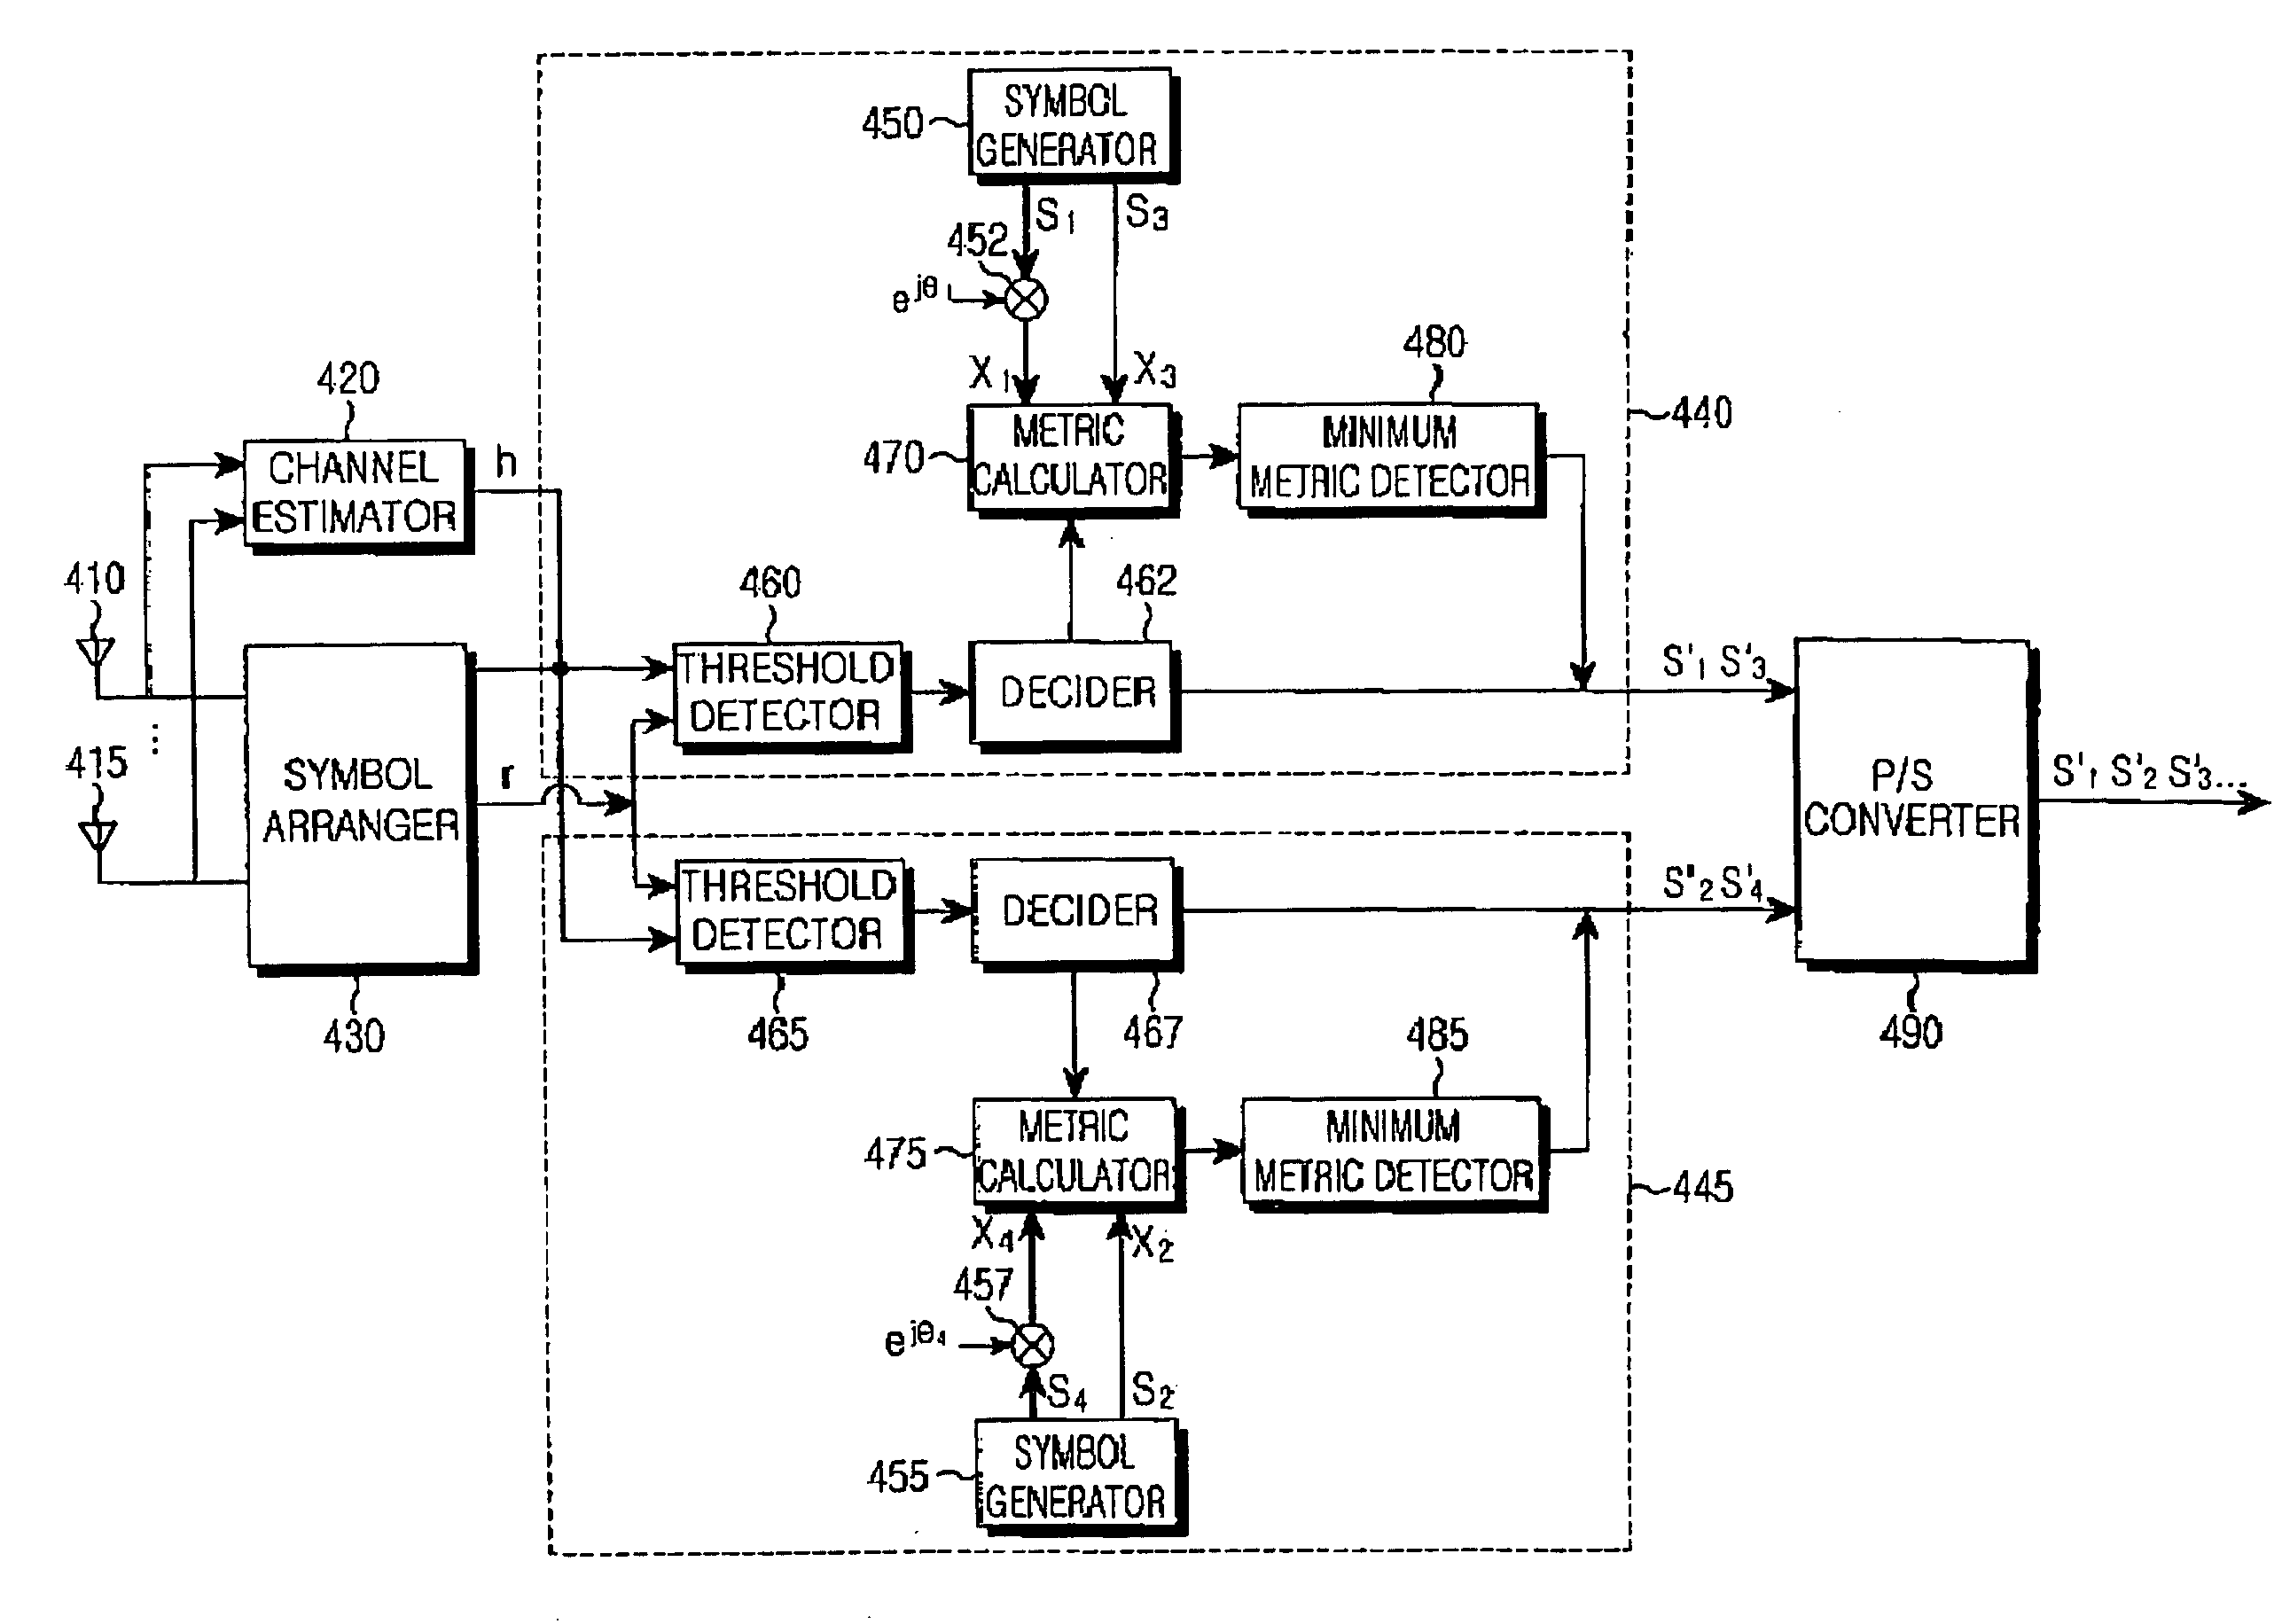 Receiving apparatus in a radio communication system using at least three transmitter antennas